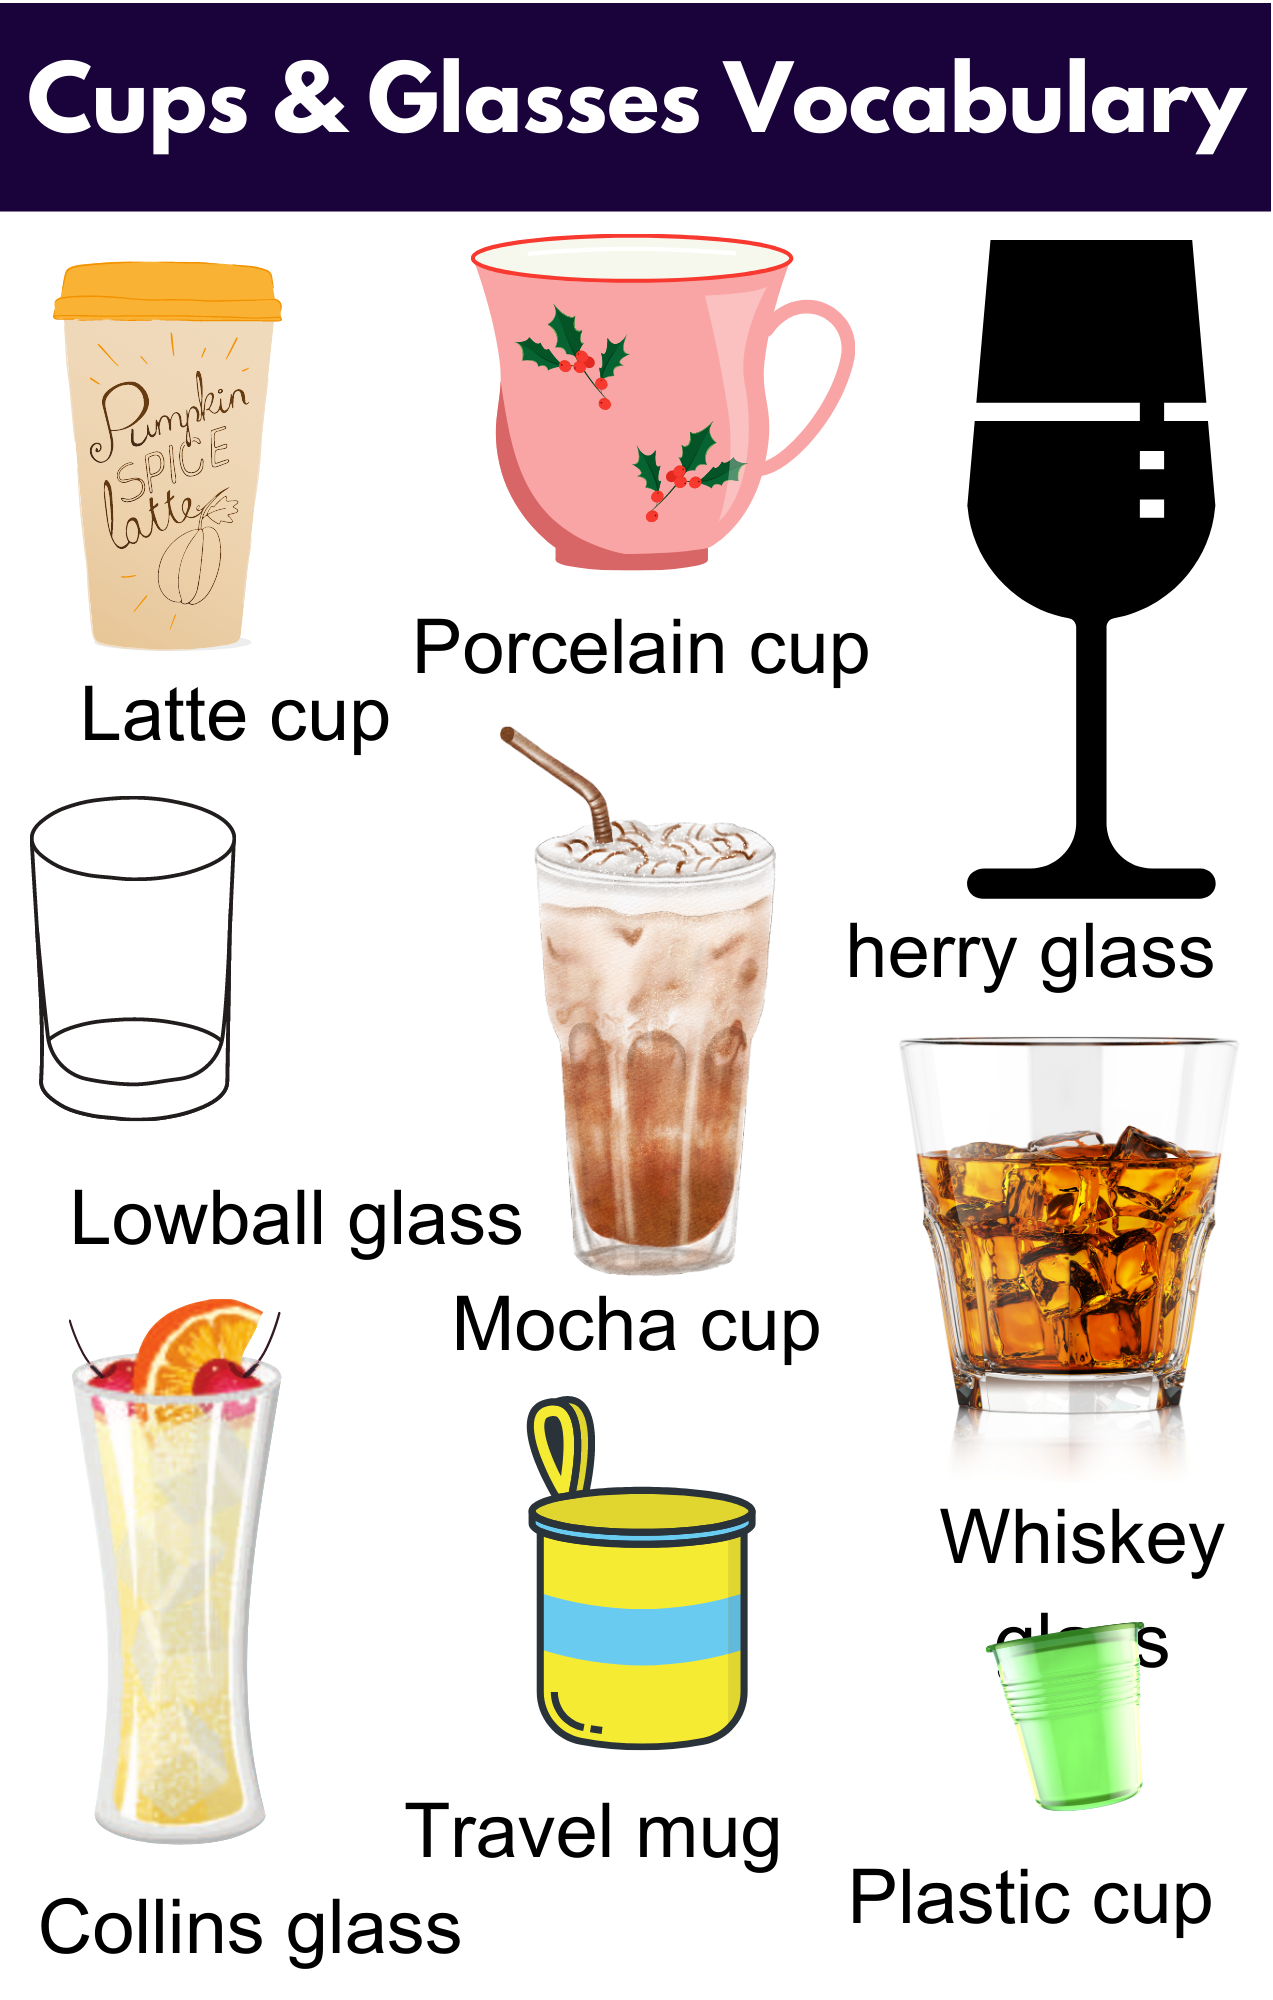 Cups & Glasses Vocabulary